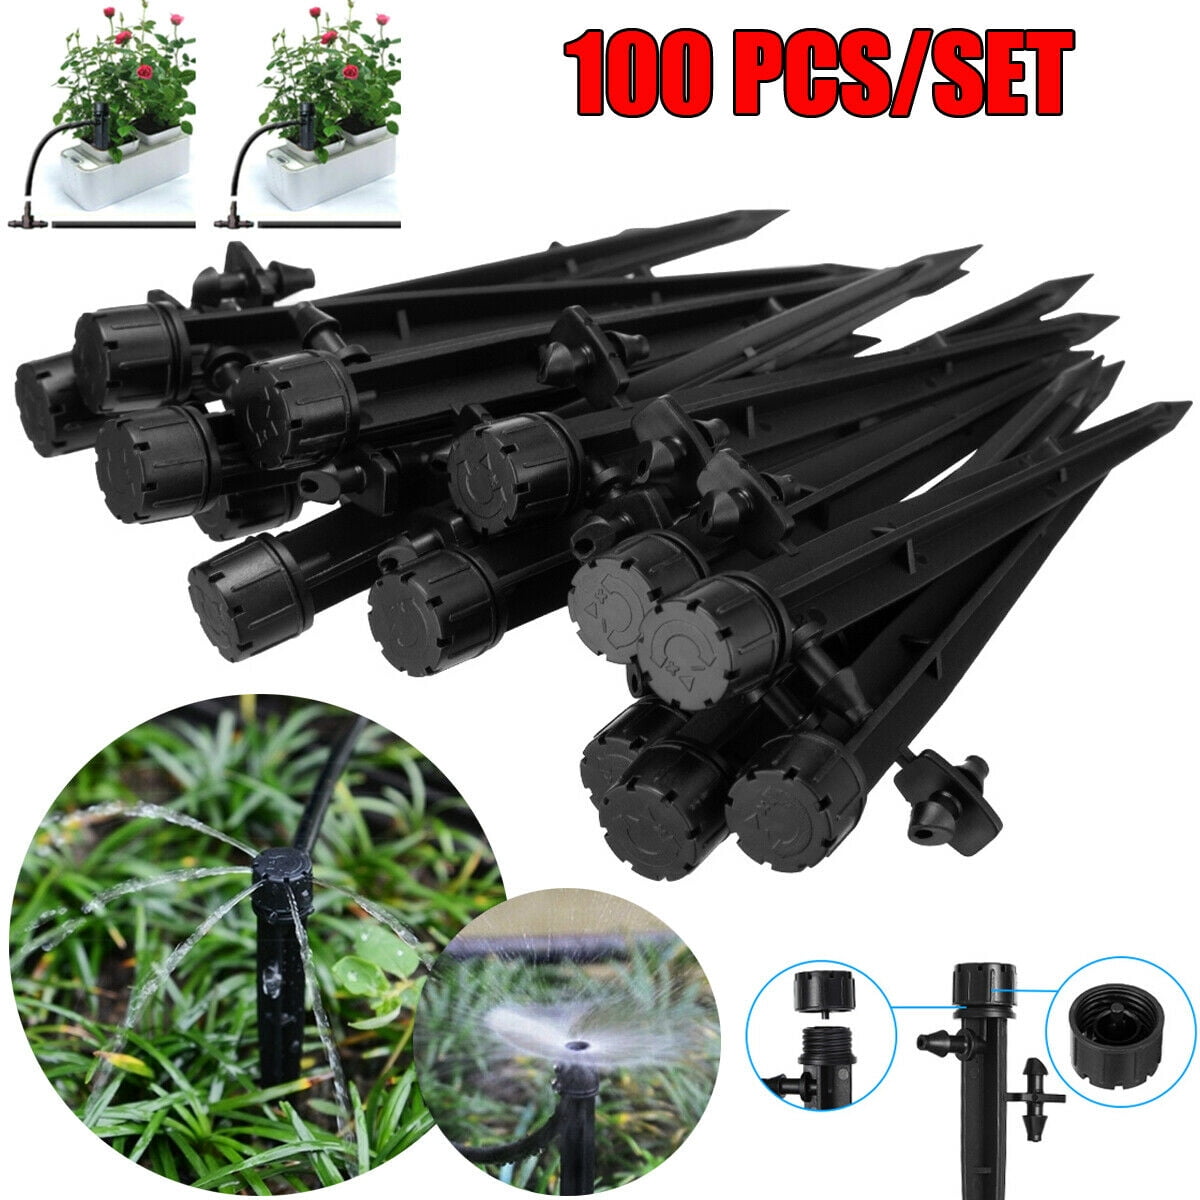 50/100pcs Micro Bubbler Drip Irrigation Adjustable Emitter Stake Water Drippers 